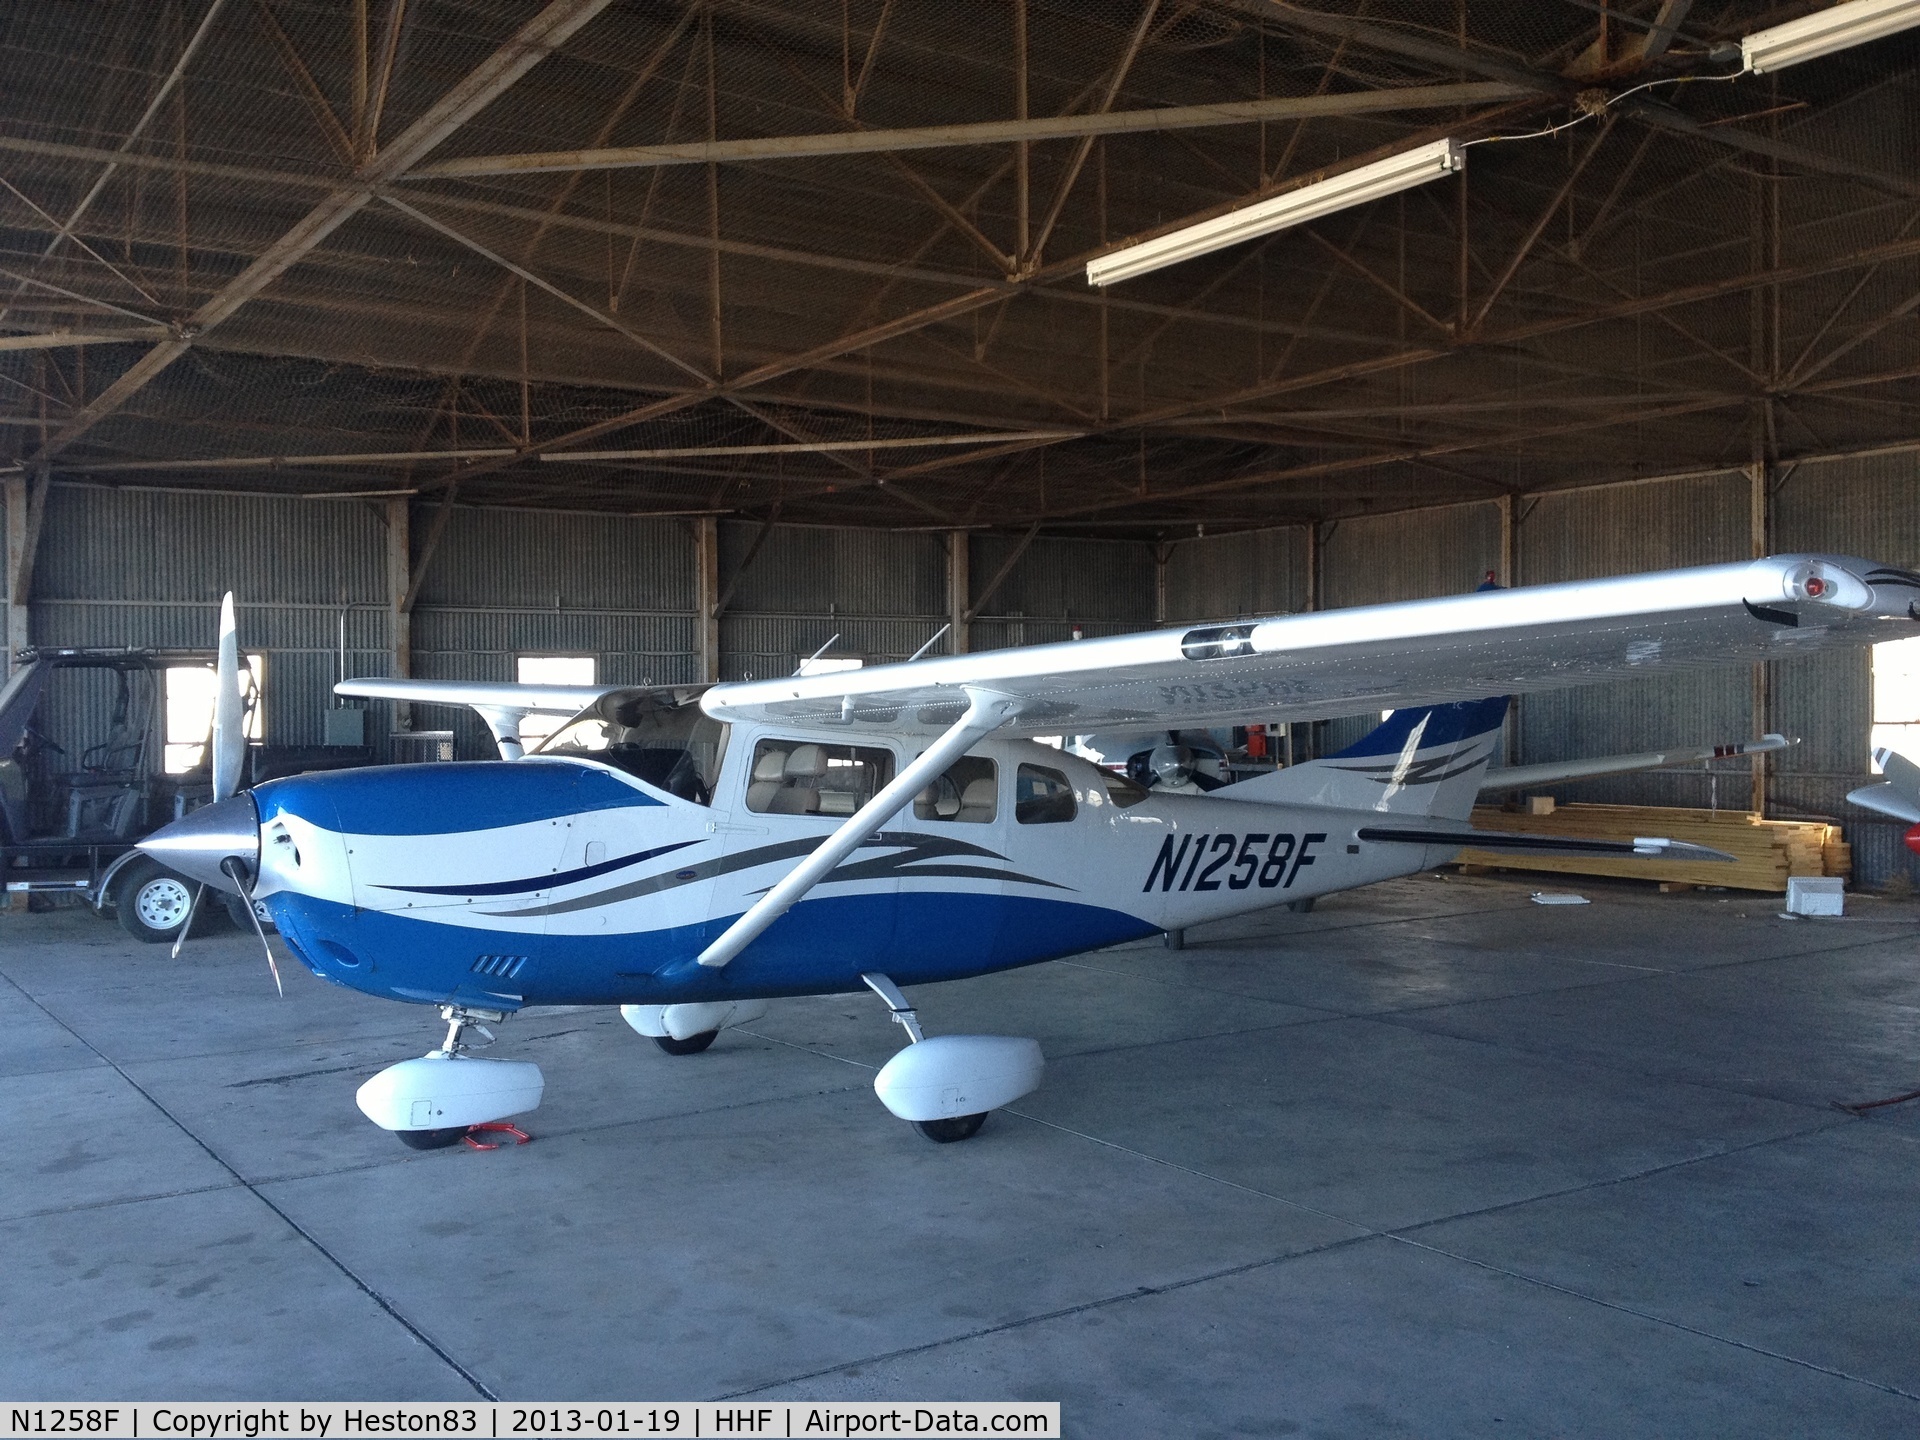 N1258F, 2006 Cessna T206H Turbo Stationair C/N T20608674, Nice to see new aircraft coming in here!